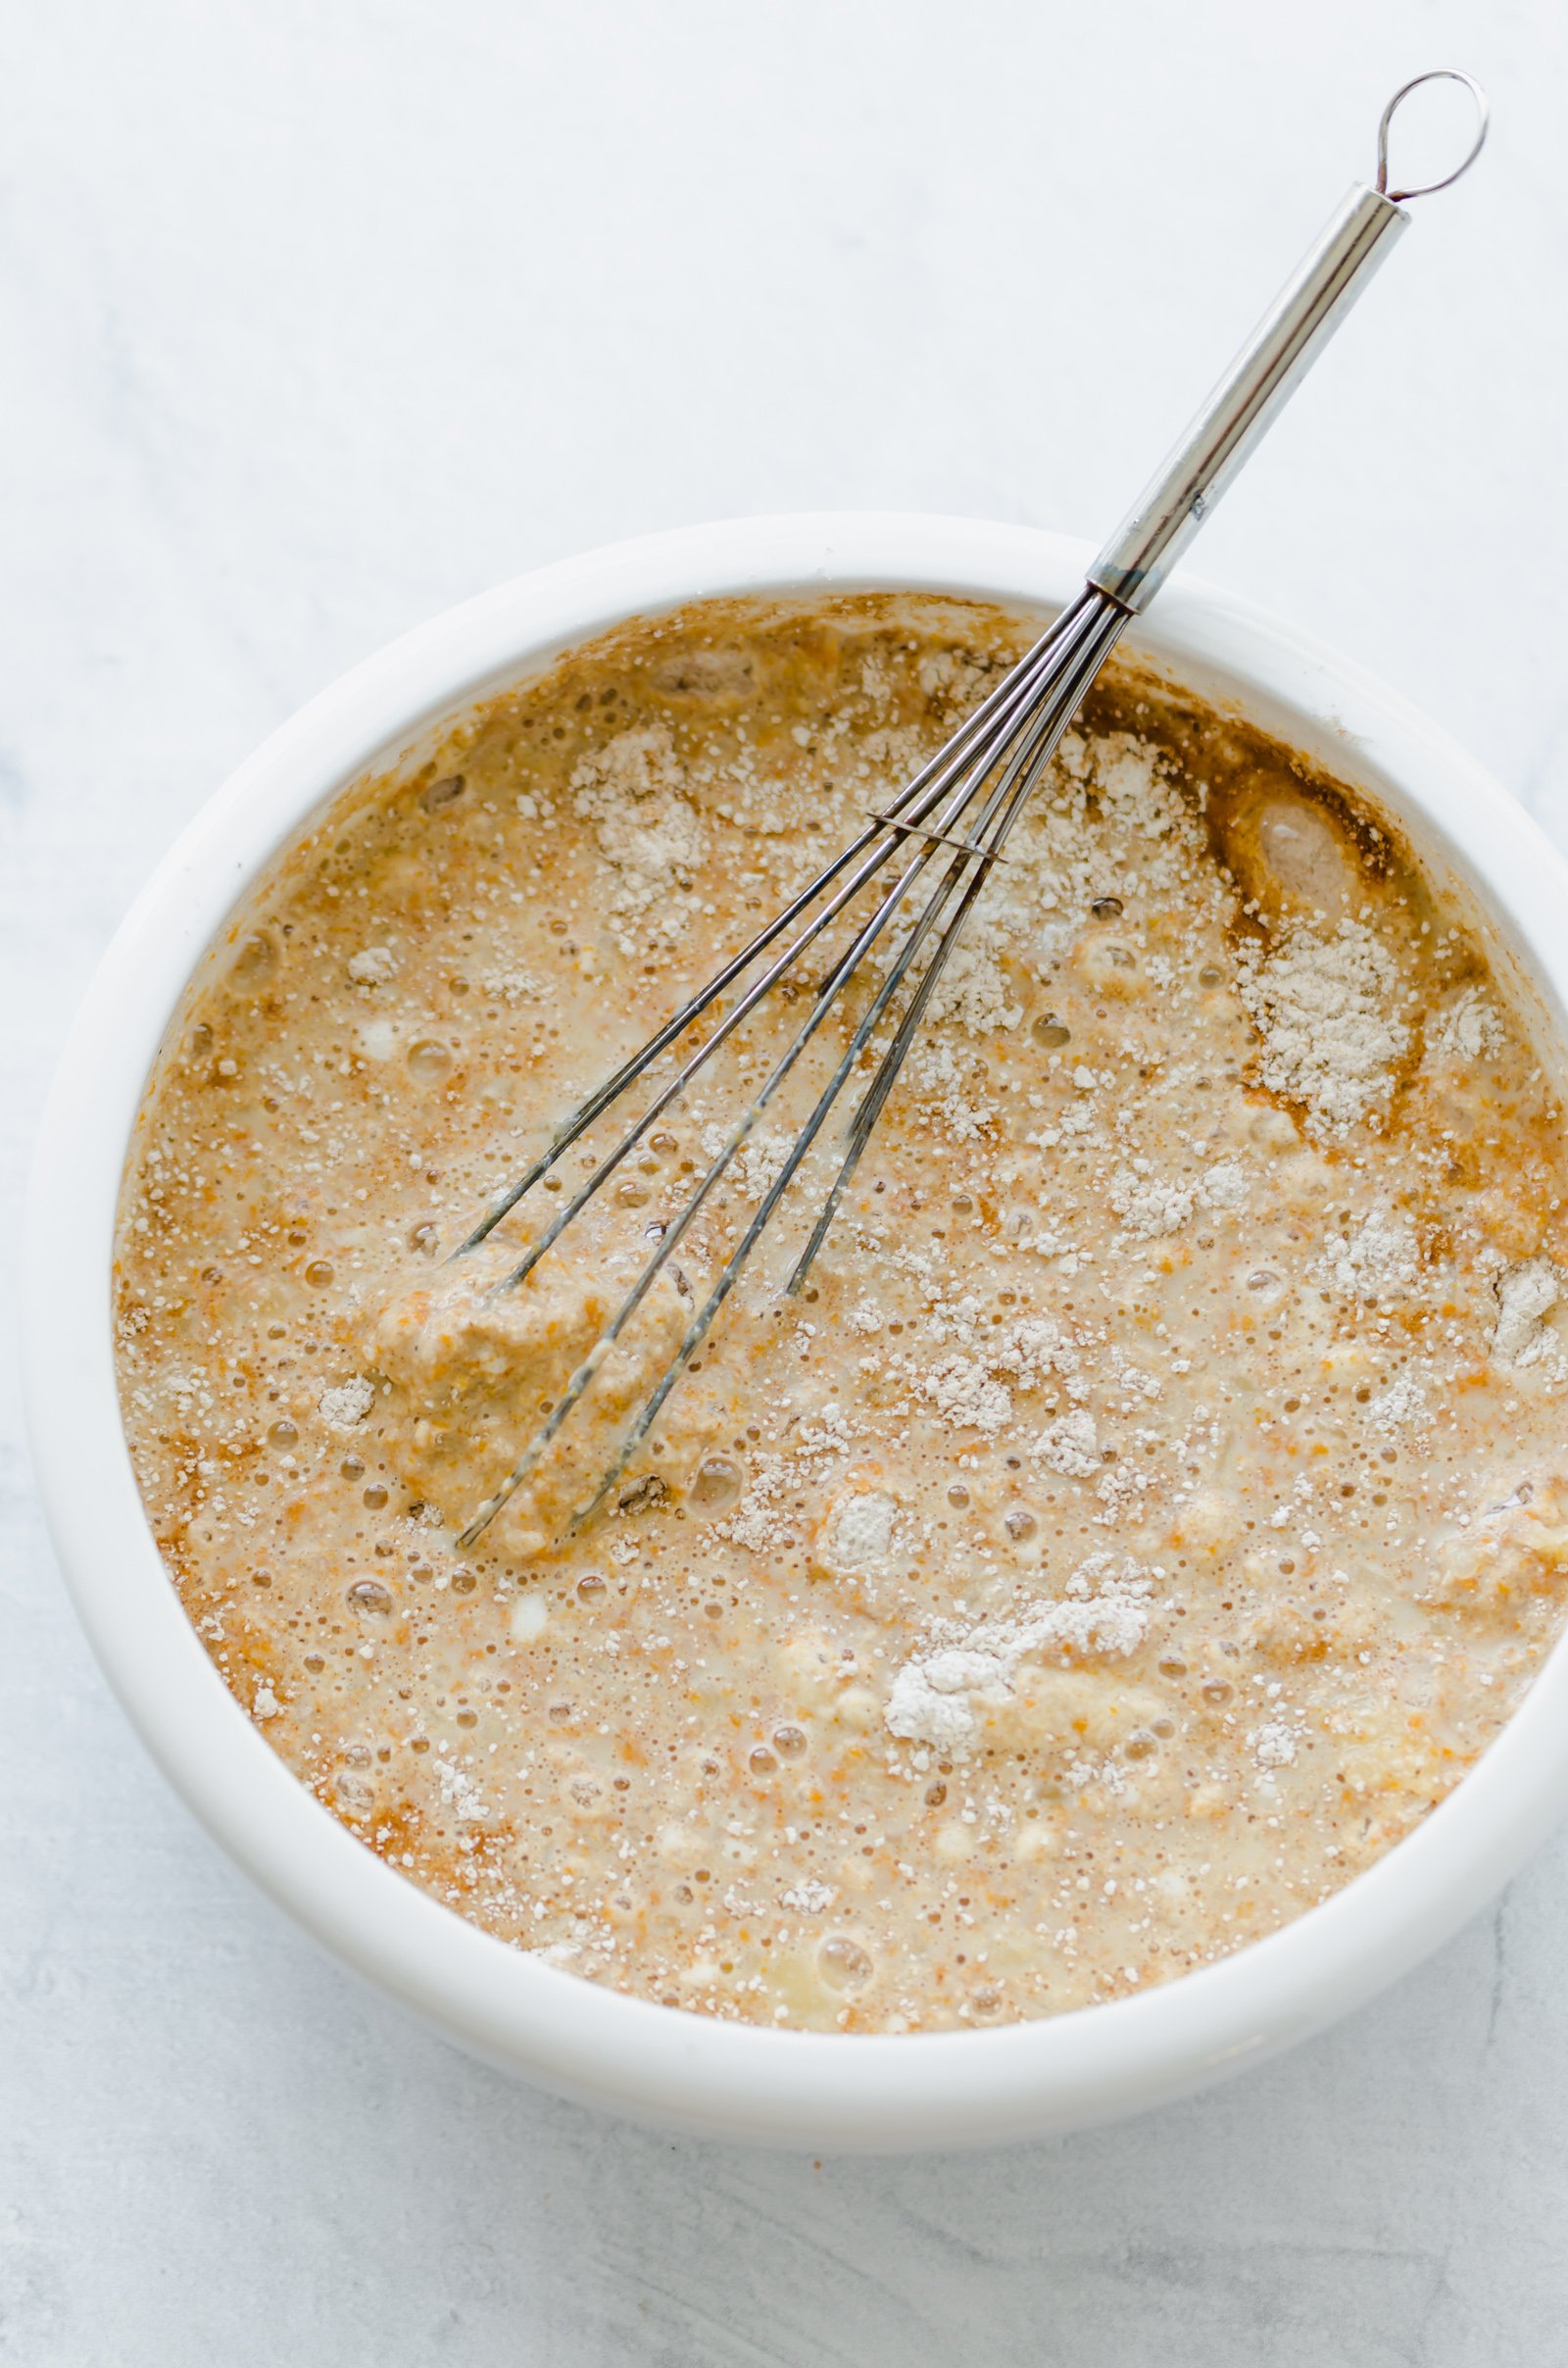 Pumpkin pancake batter in a bowl with whisk.